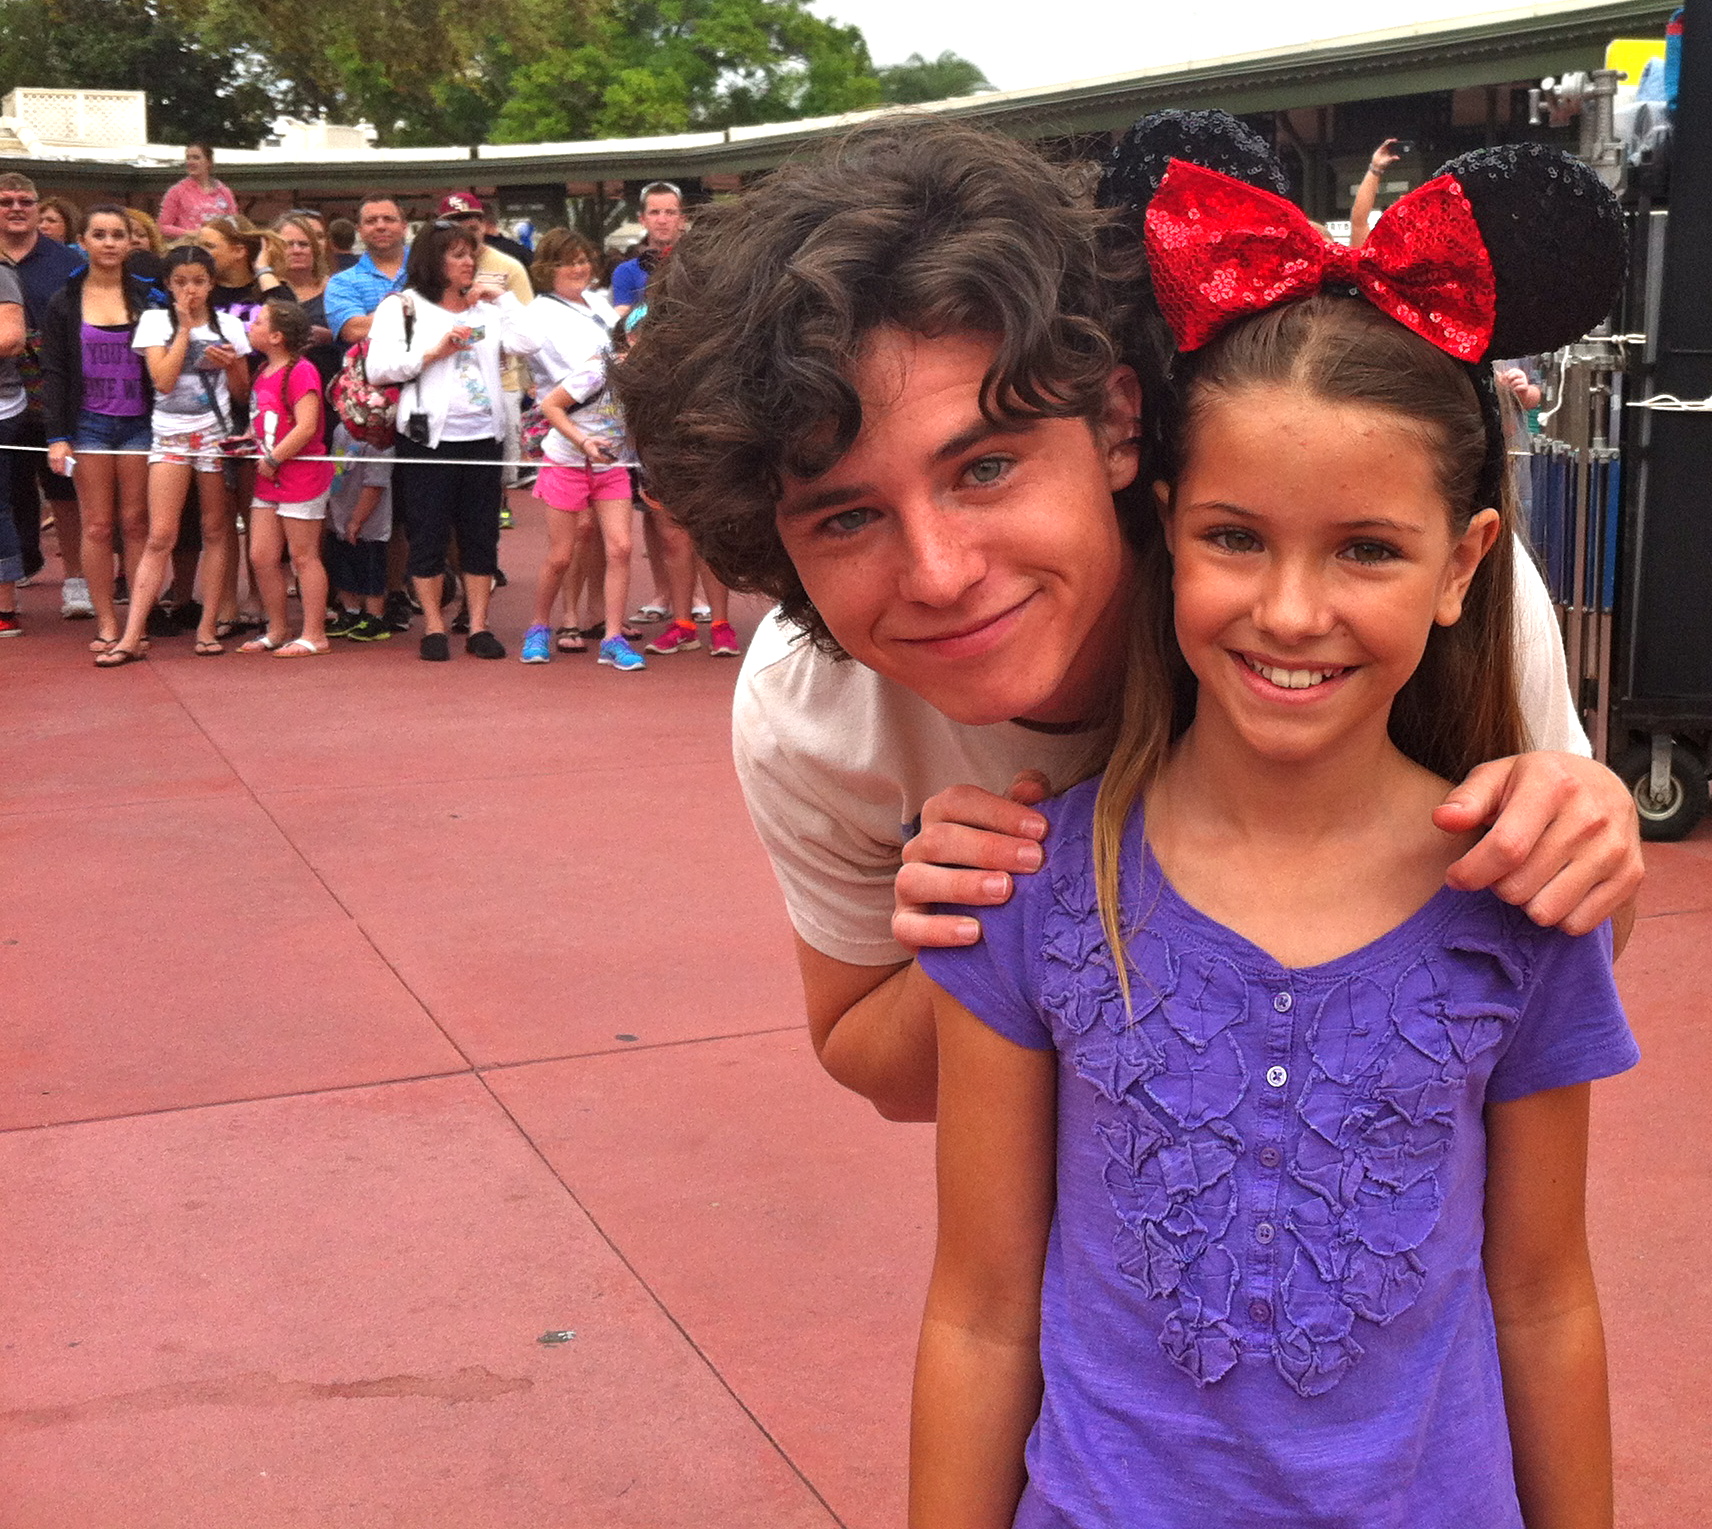 On the set of The Middle with Charlie McDermott who plays Axl Heck